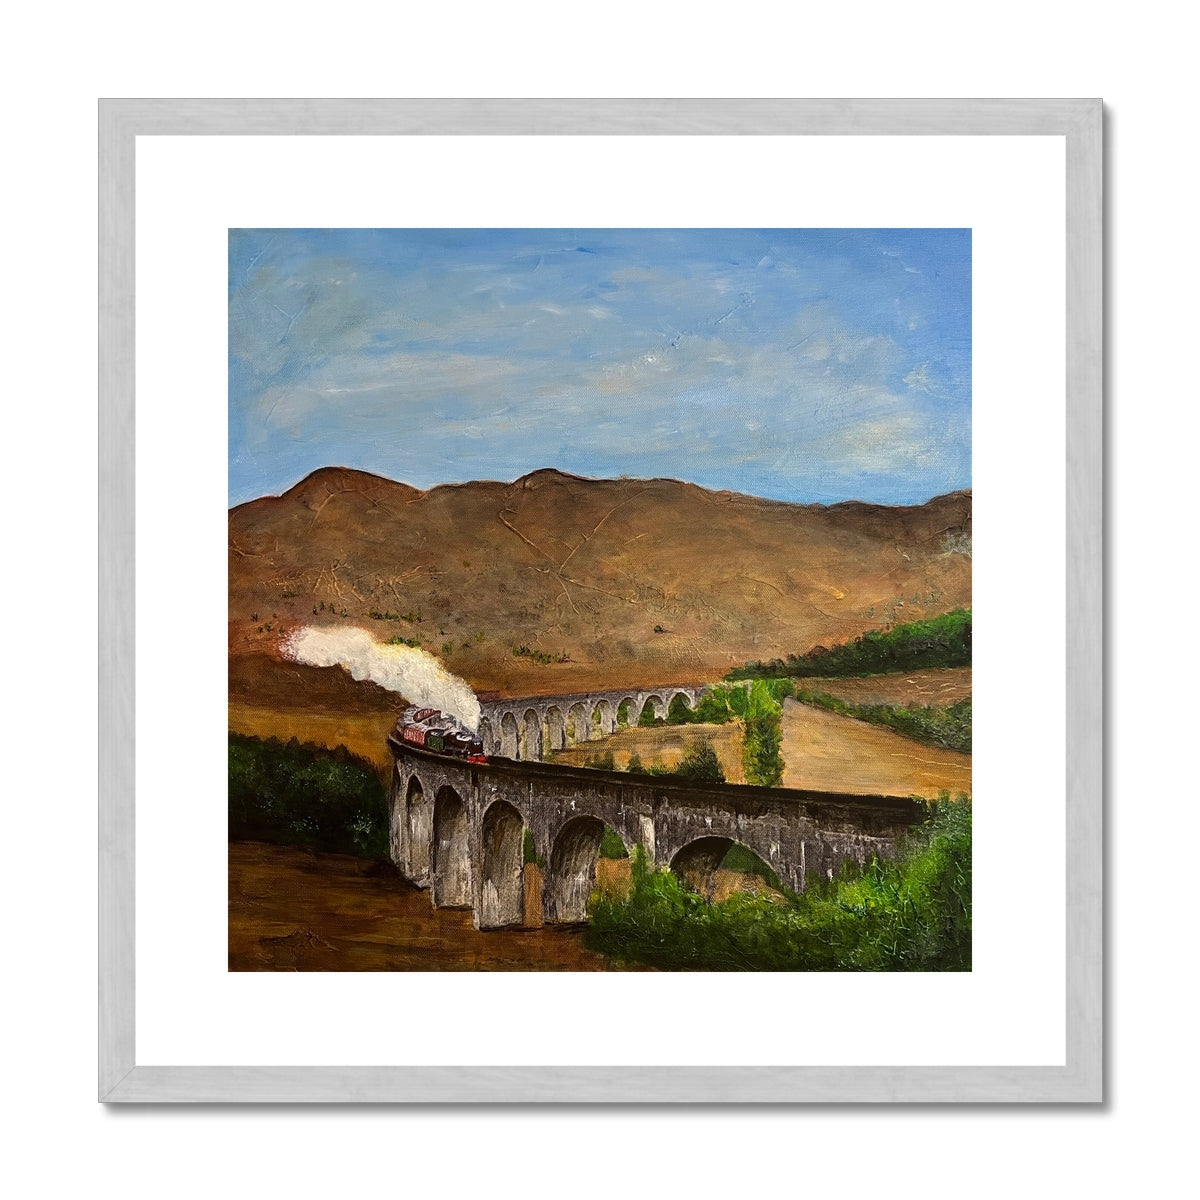 Glenfinnan Viaduct Painting | Antique Framed & Mounted Prints From Scotland-Antique Framed & Mounted Prints-Scottish Highlands & Lowlands Art Gallery-20"x20"-Silver Frame-Paintings, Prints, Homeware, Art Gifts From Scotland By Scottish Artist Kevin Hunter